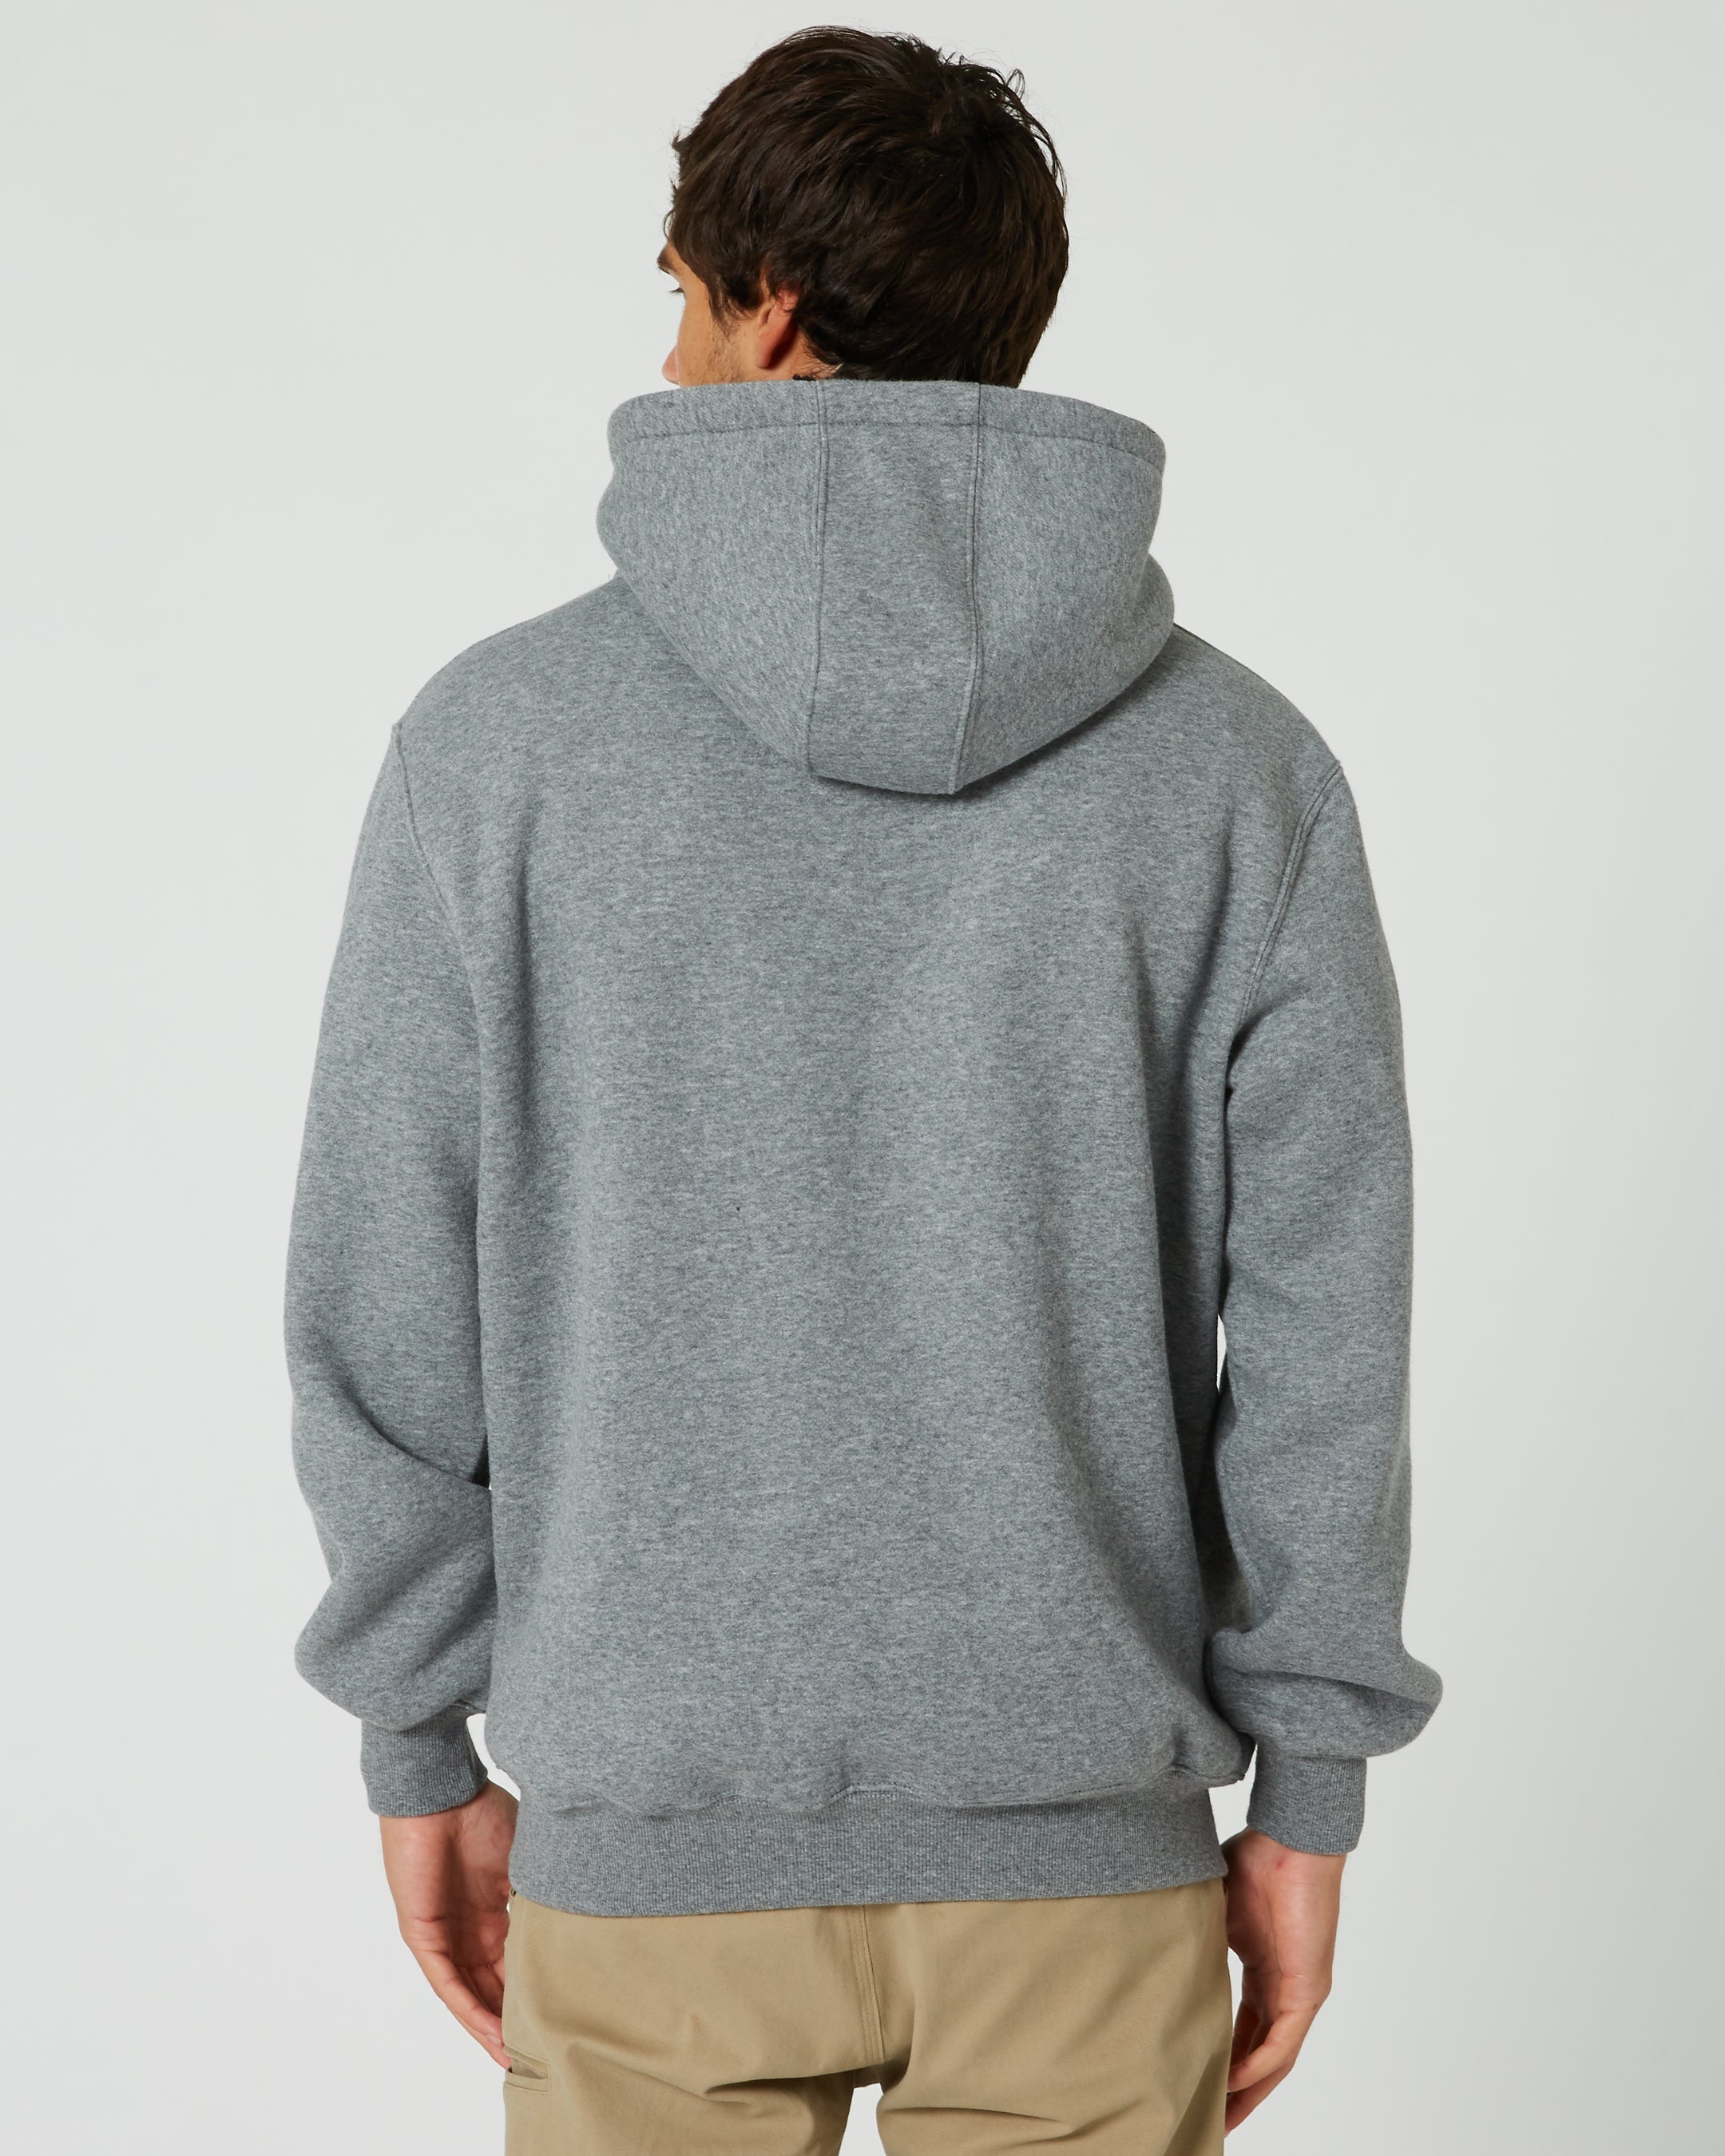 Jetpilot Corp HD Mens Pullover Hoodie - Charcoal 9